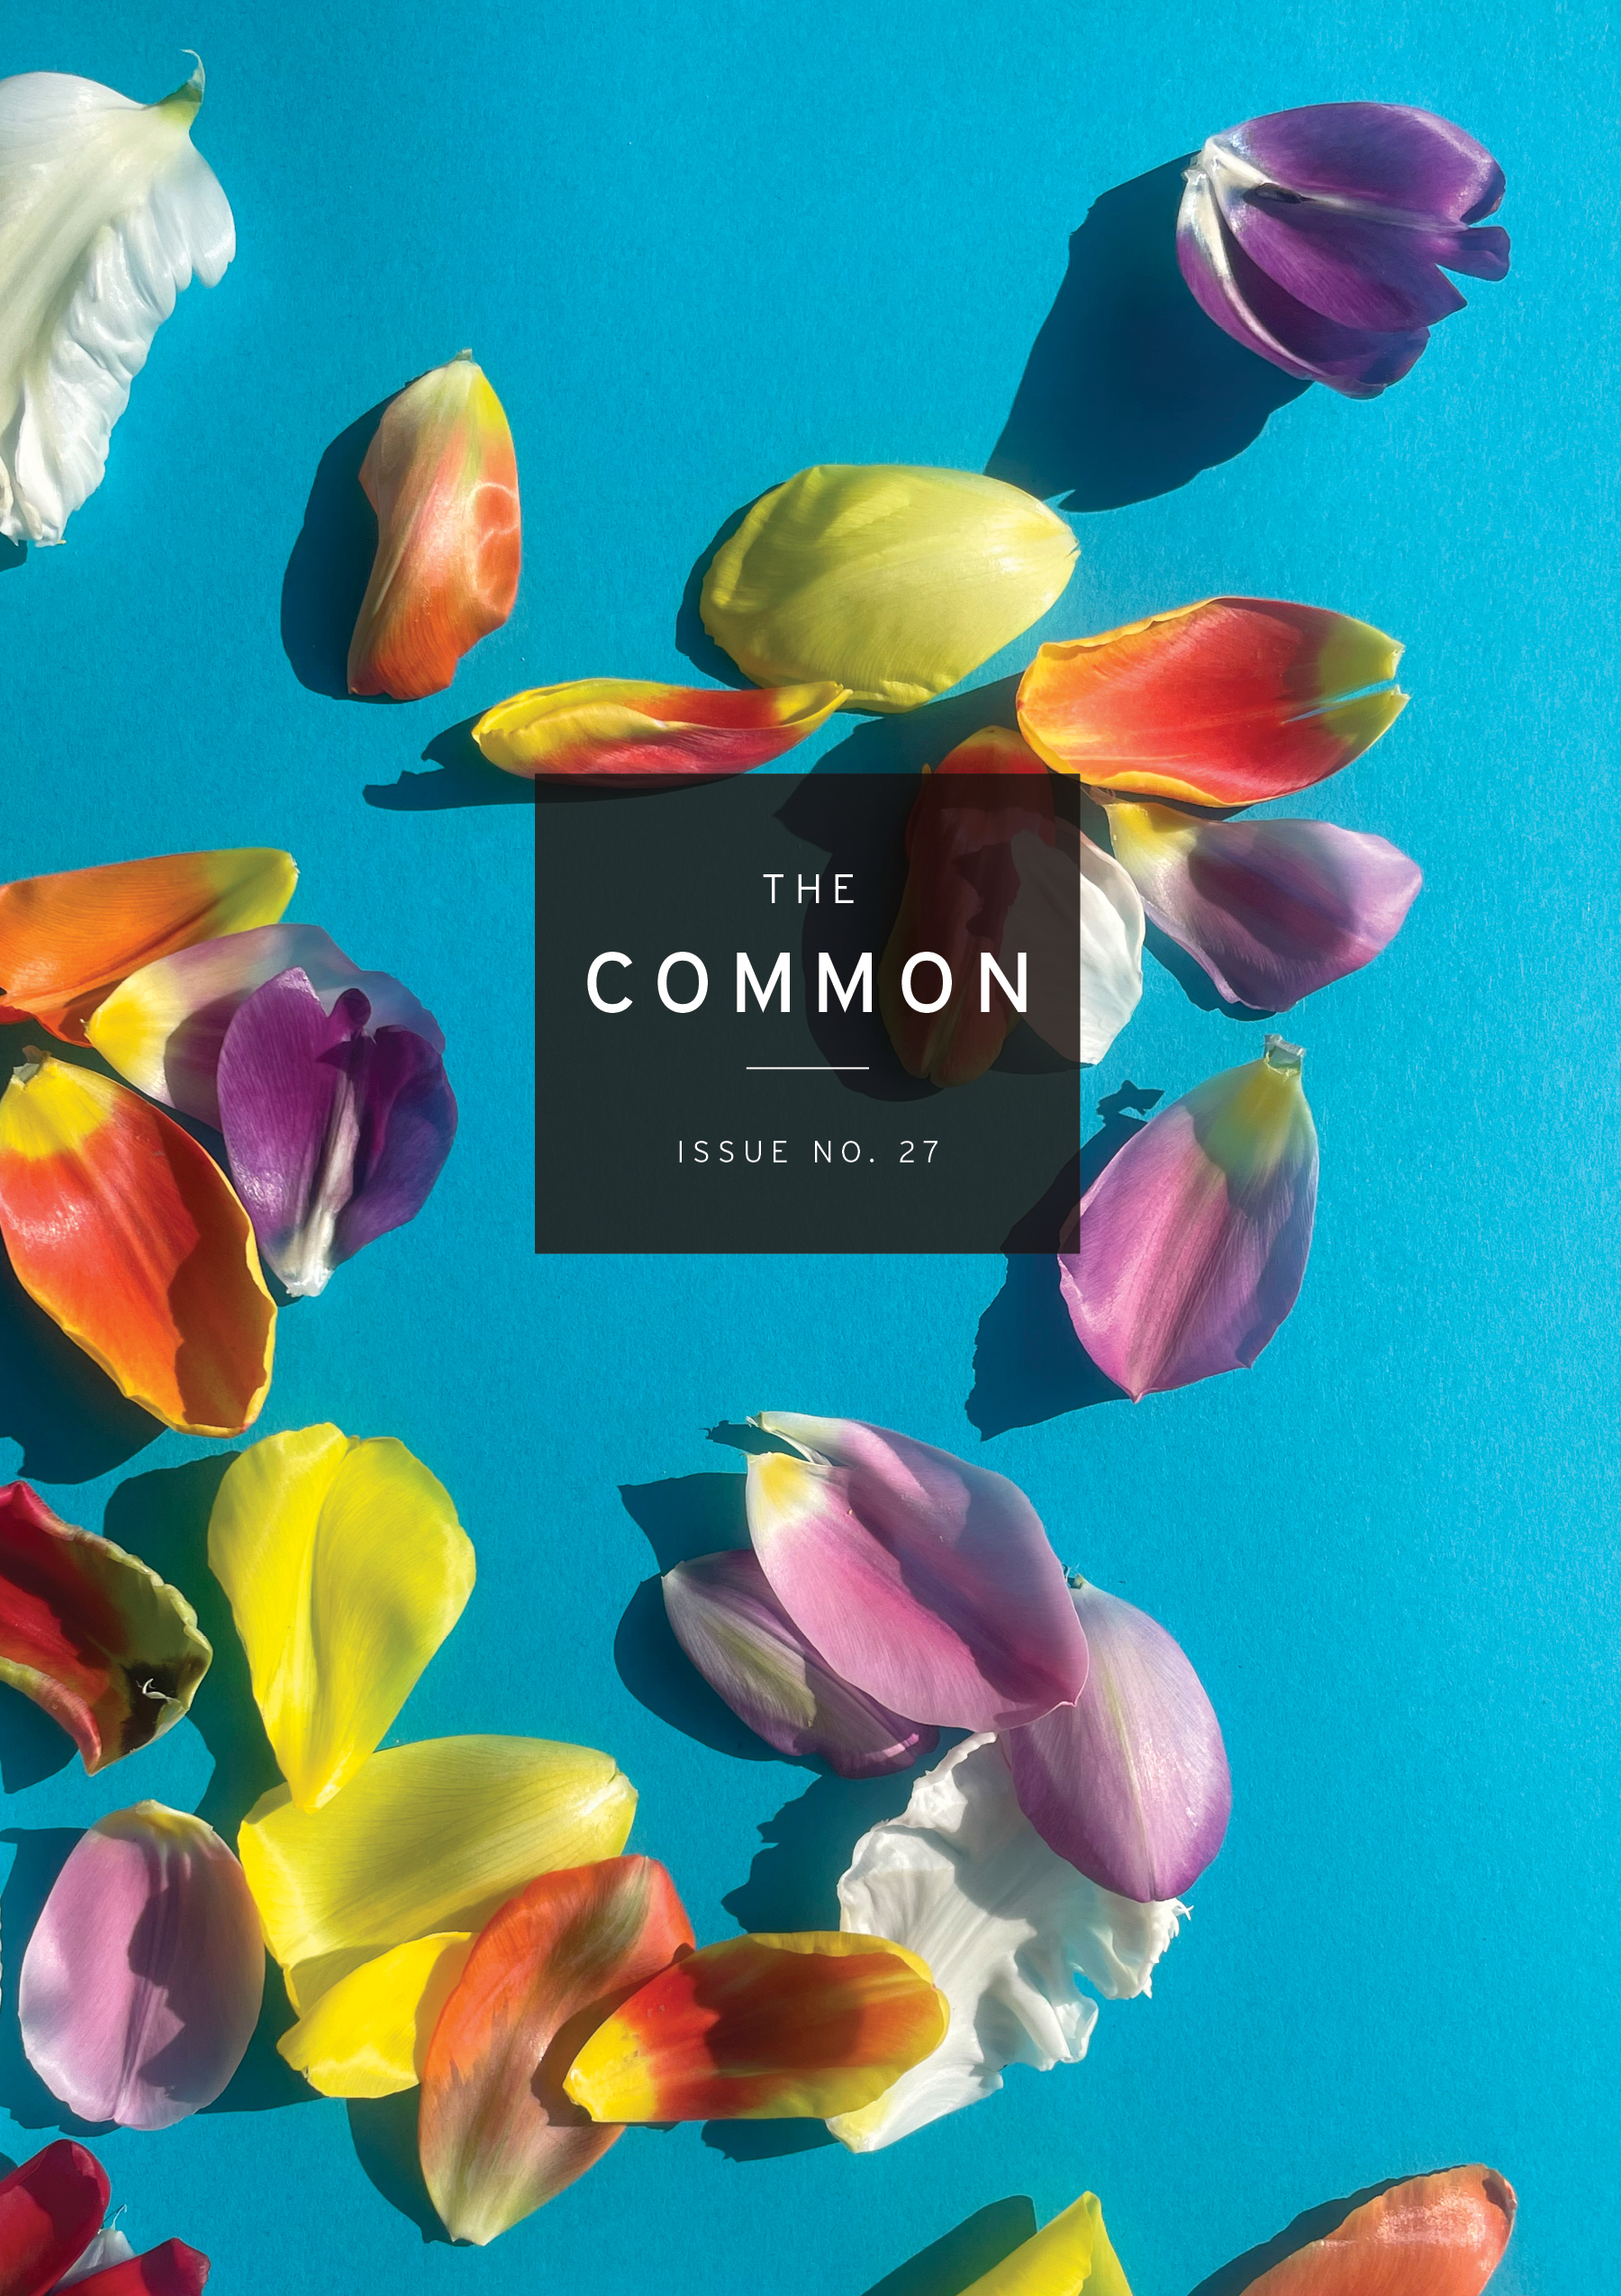 Issue 27 cover of The Common